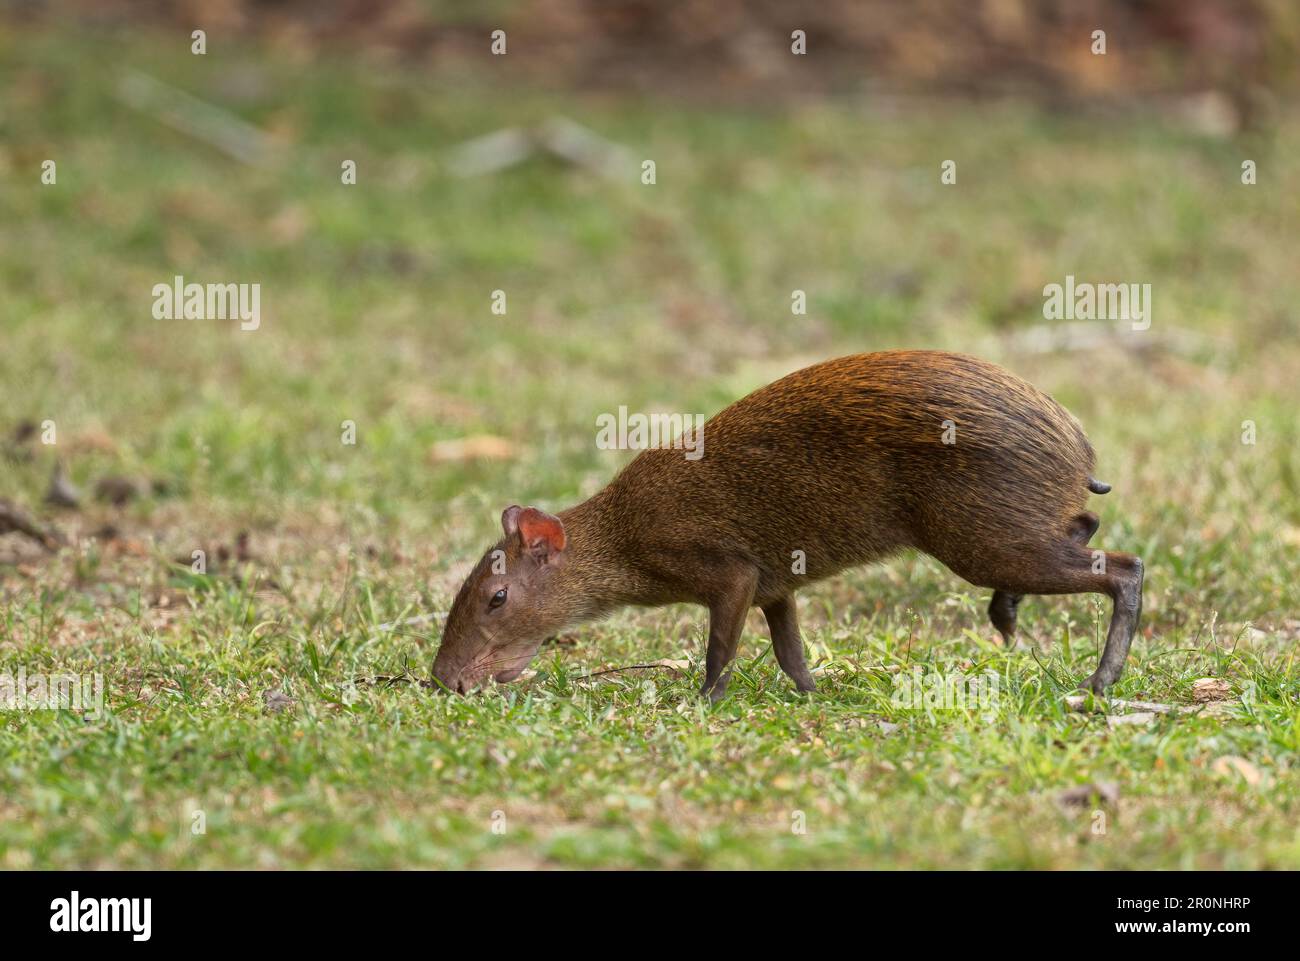 Central American Agouti - Dasyprocta punctata, large brown rodent from Central and Latin America forests and woodlands, Gamboa forest, Panama. Stock Photo